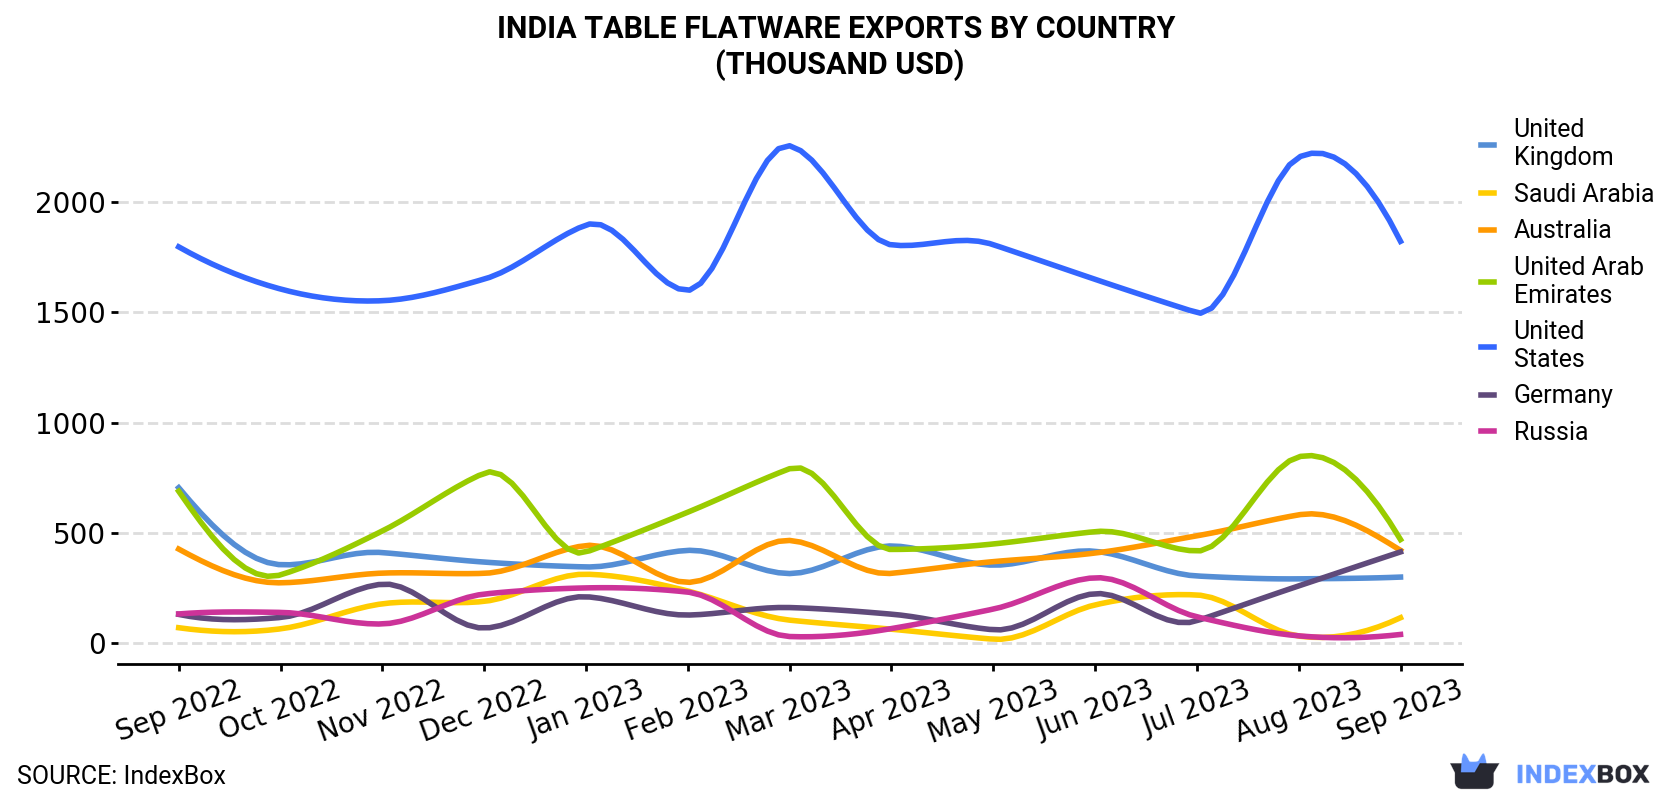 India Table Flatware Exports By Country (Thousand USD)